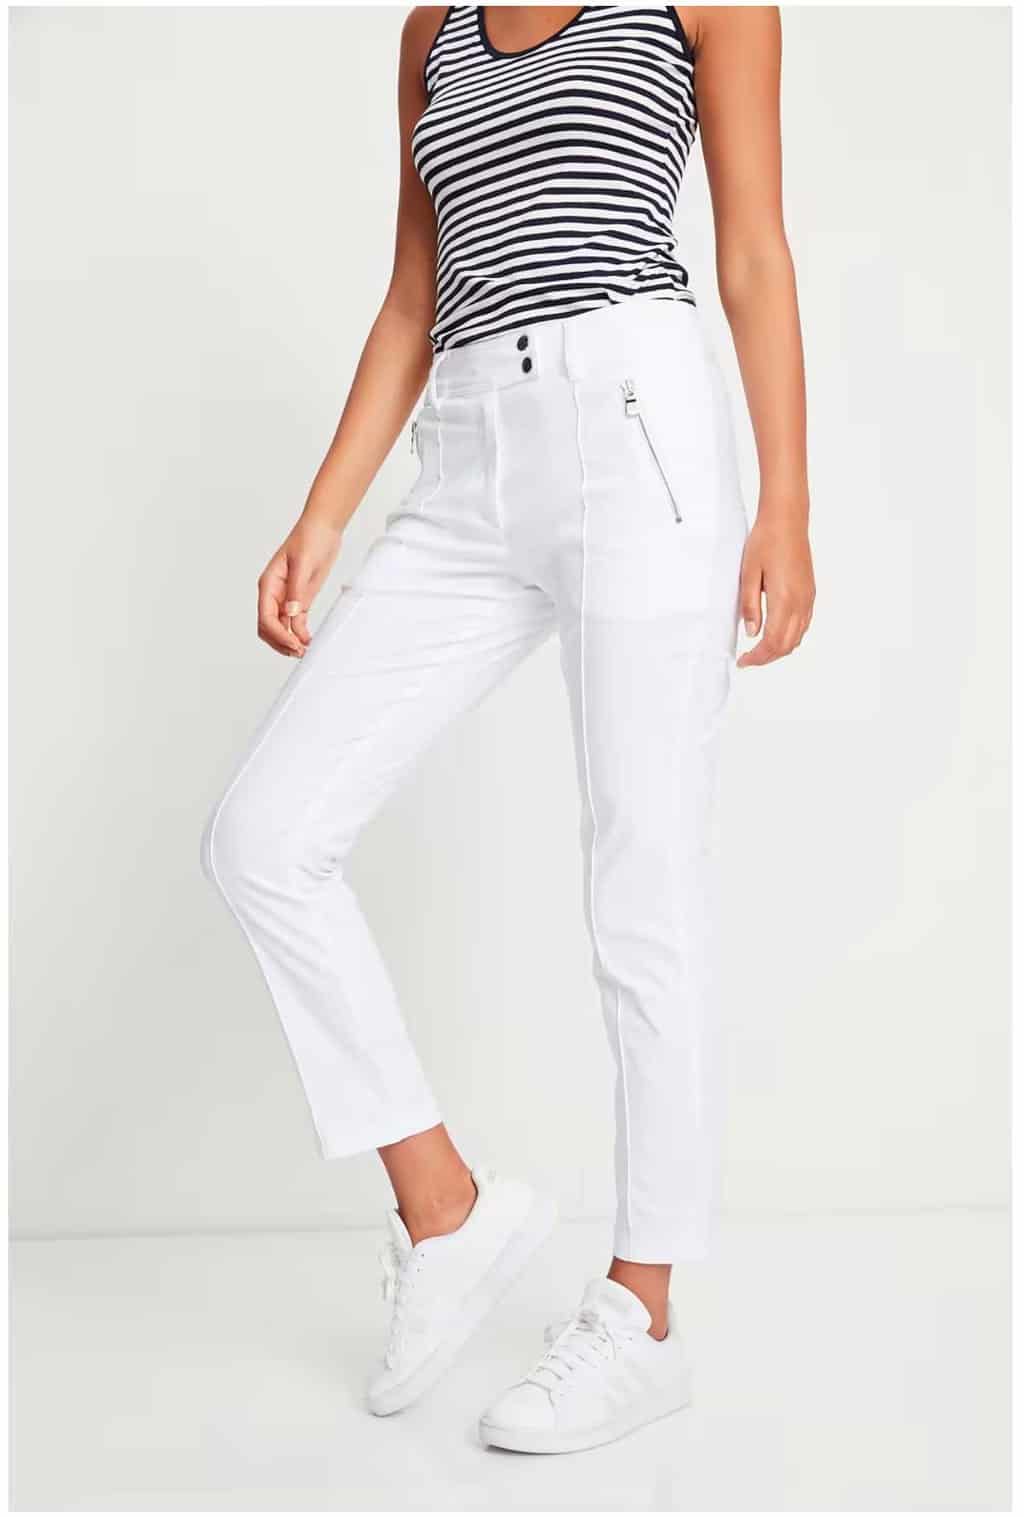 Woman modelling white Anatomi travel pants with a striped top.